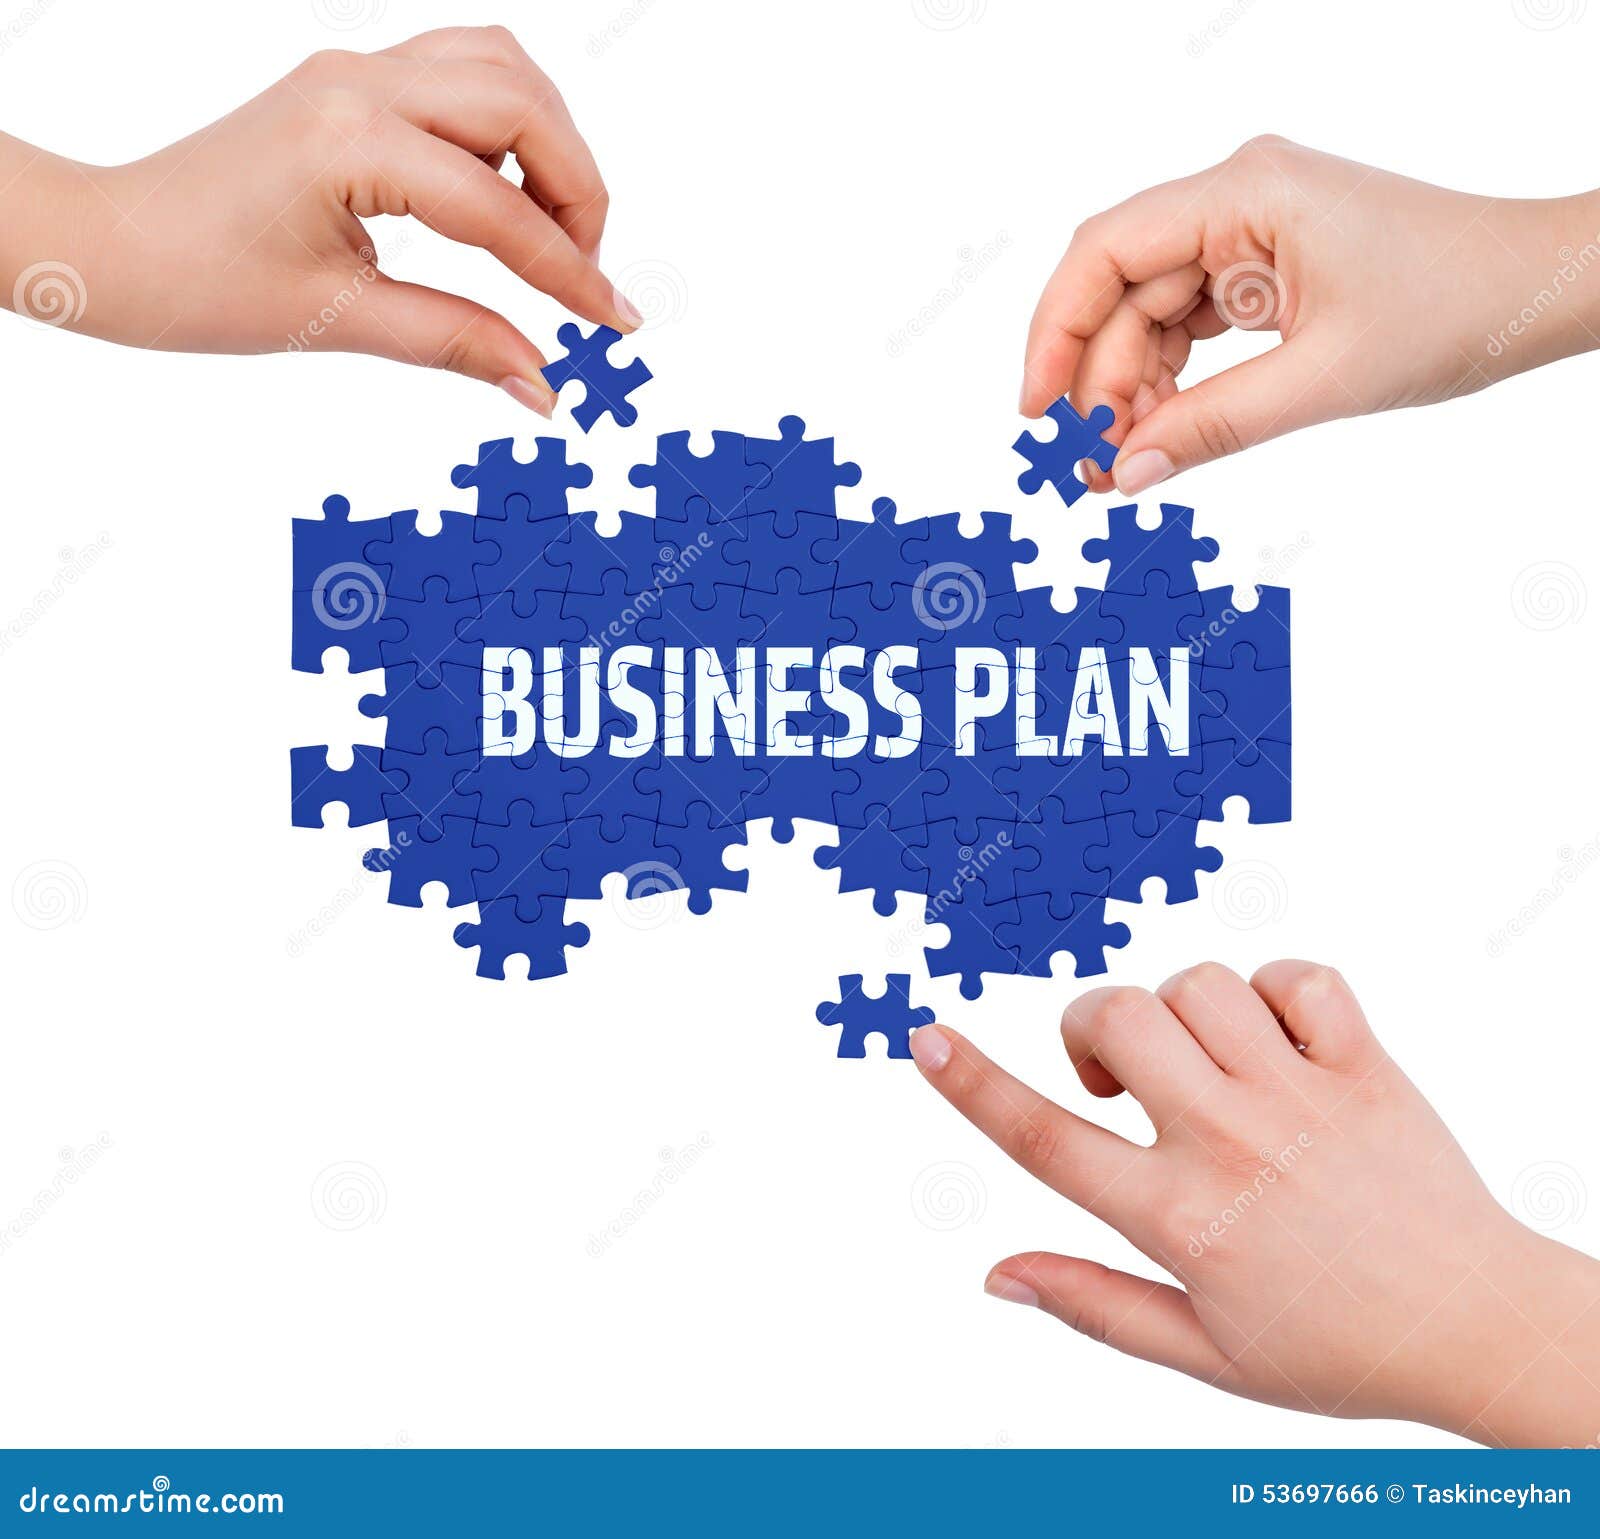 hands puzzle making business plan word isolated white 53697666